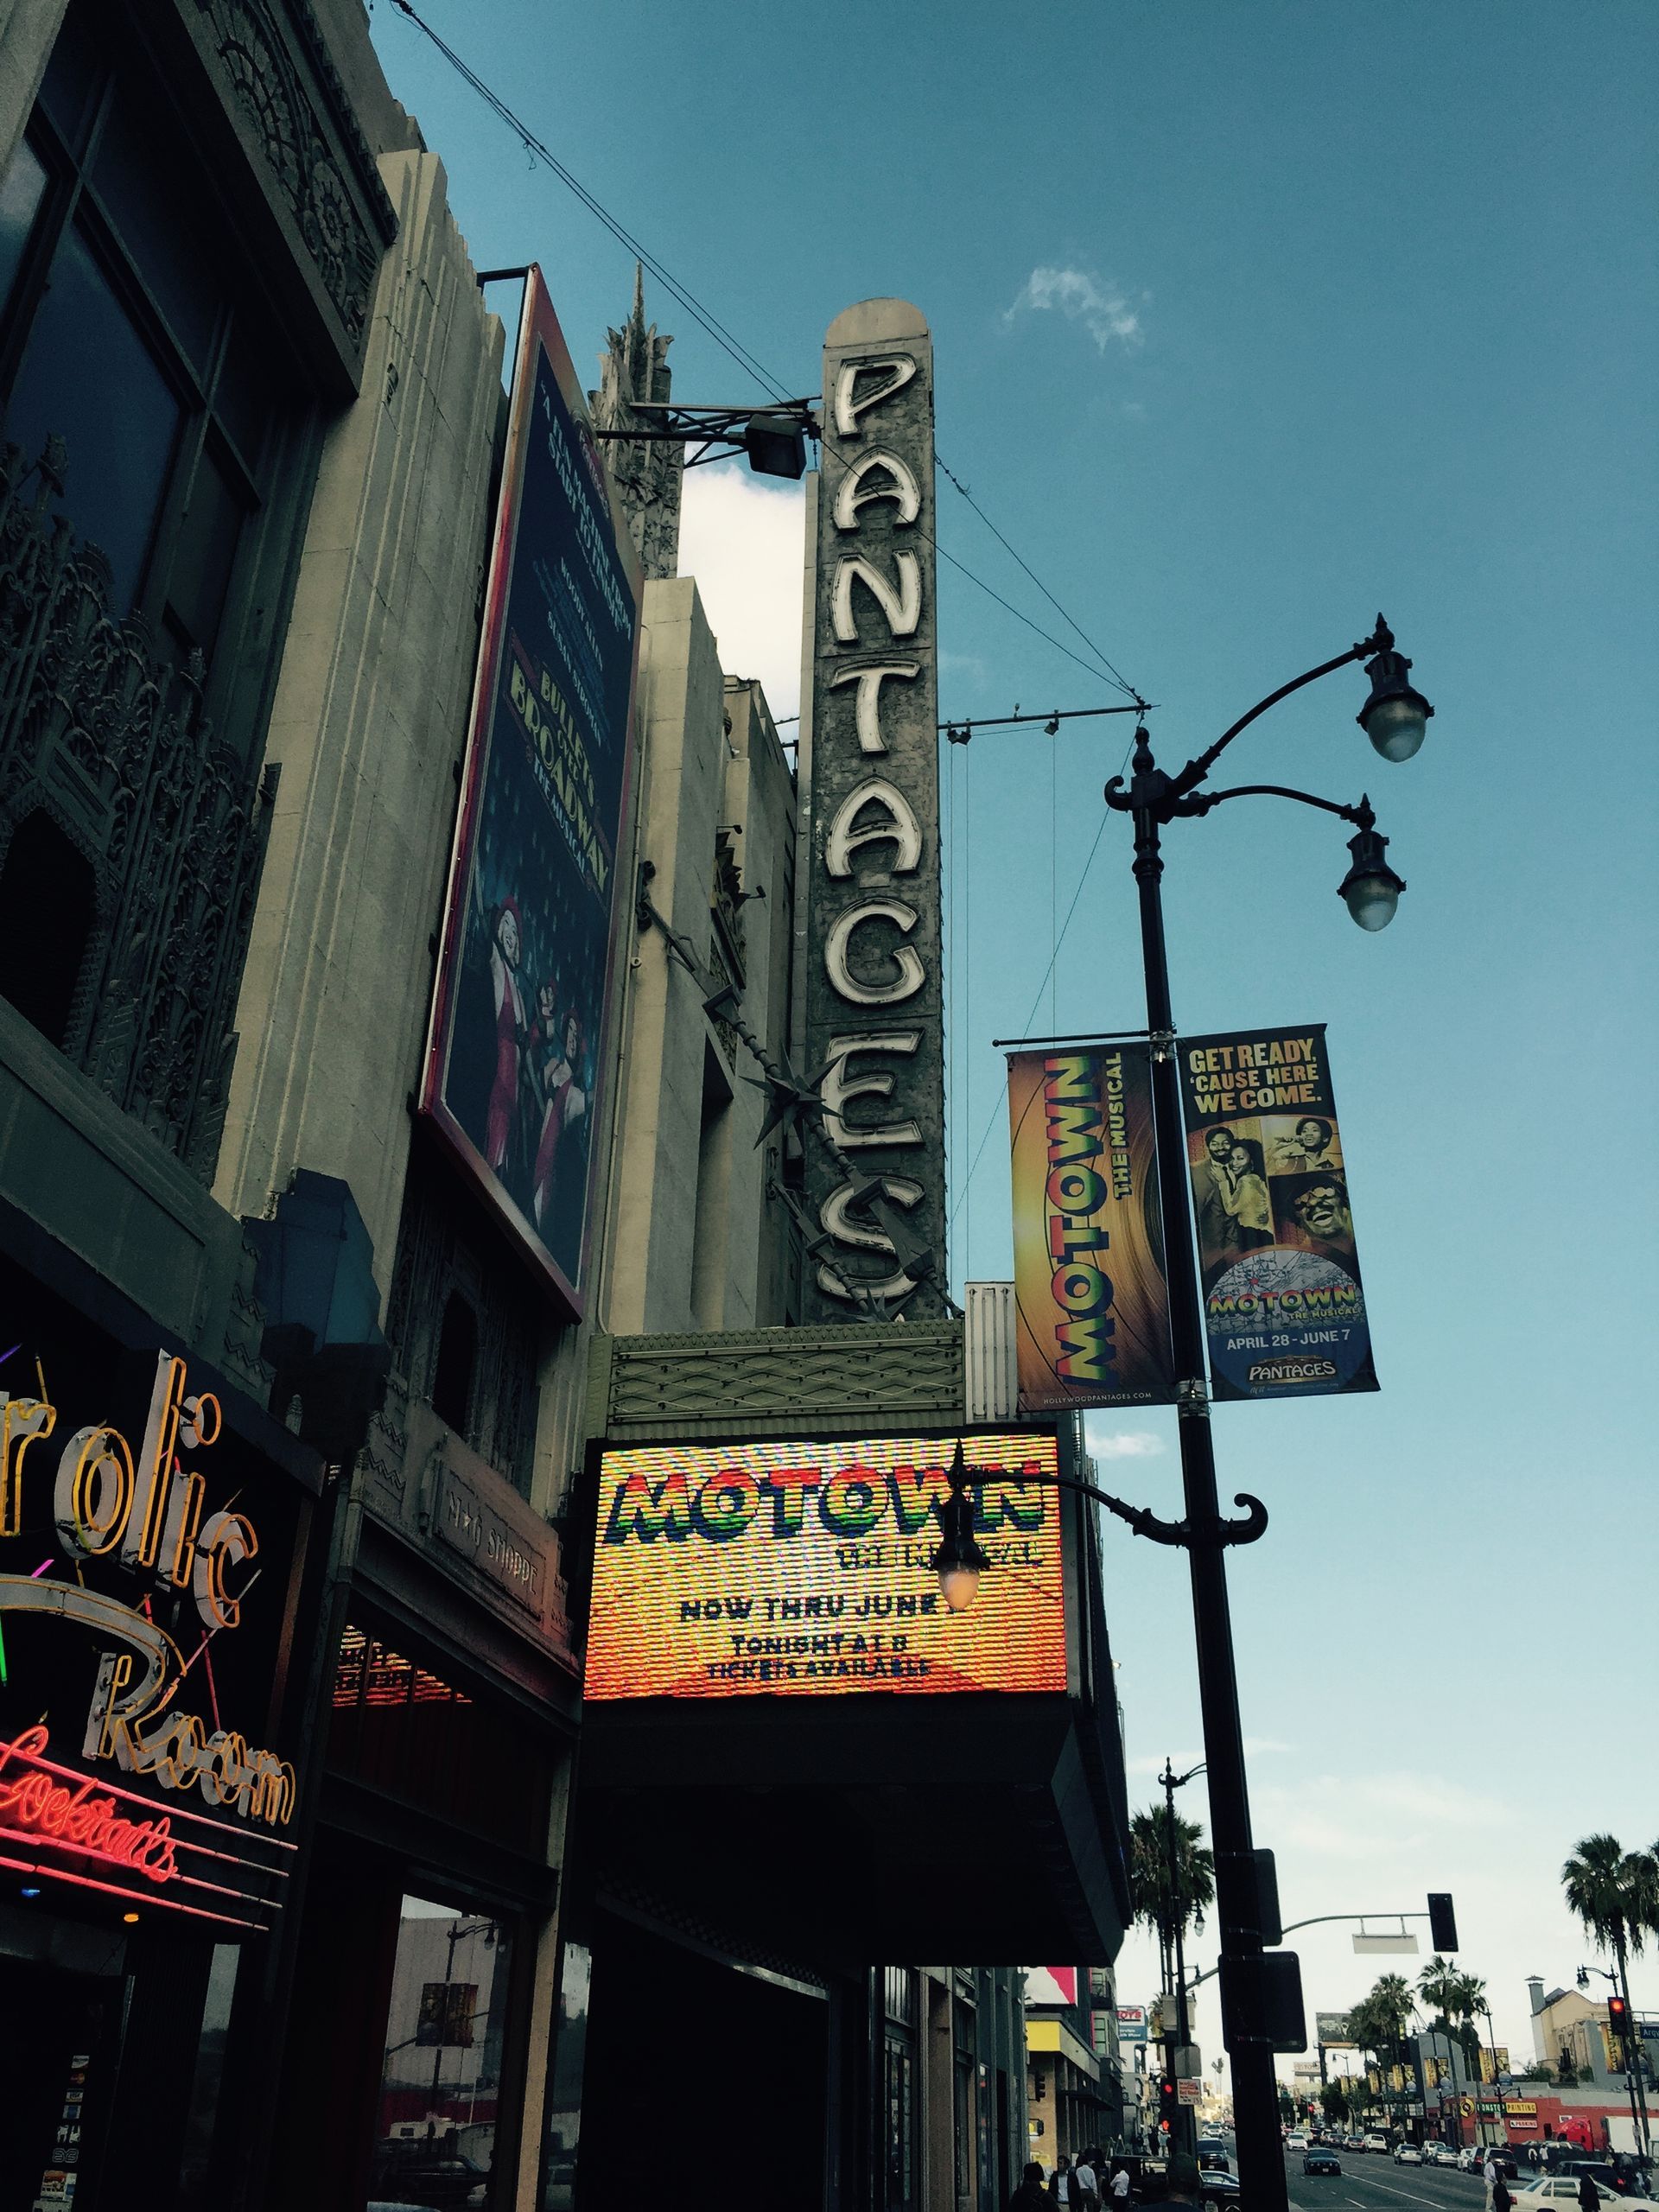 Outside the legendary Pantages Theatre and notorios Frolic Room